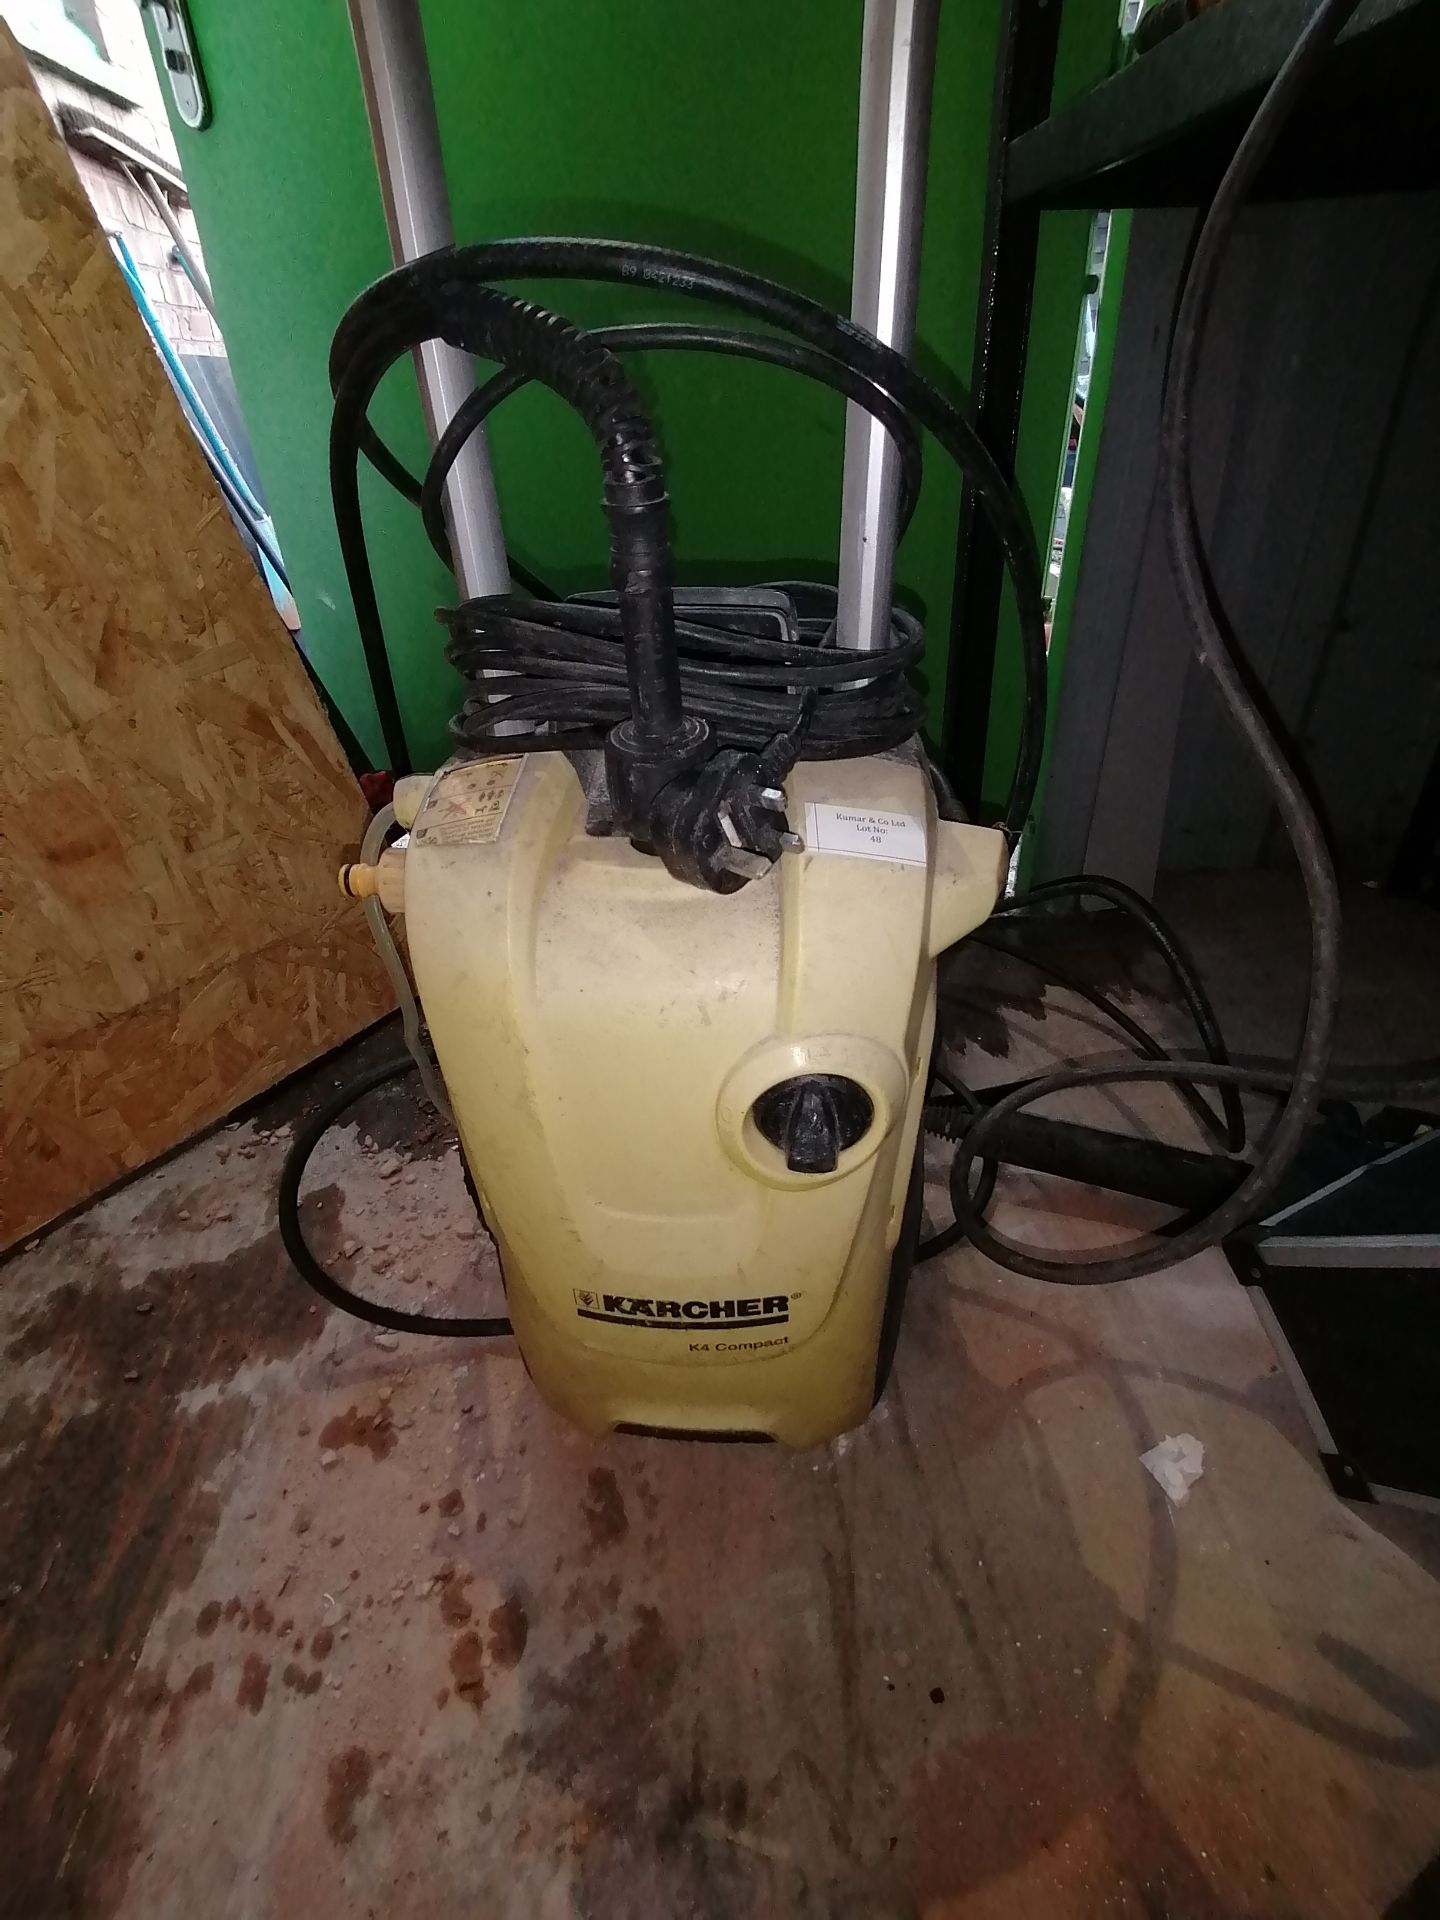 Karcher K4 Compact power washer - Image 2 of 3